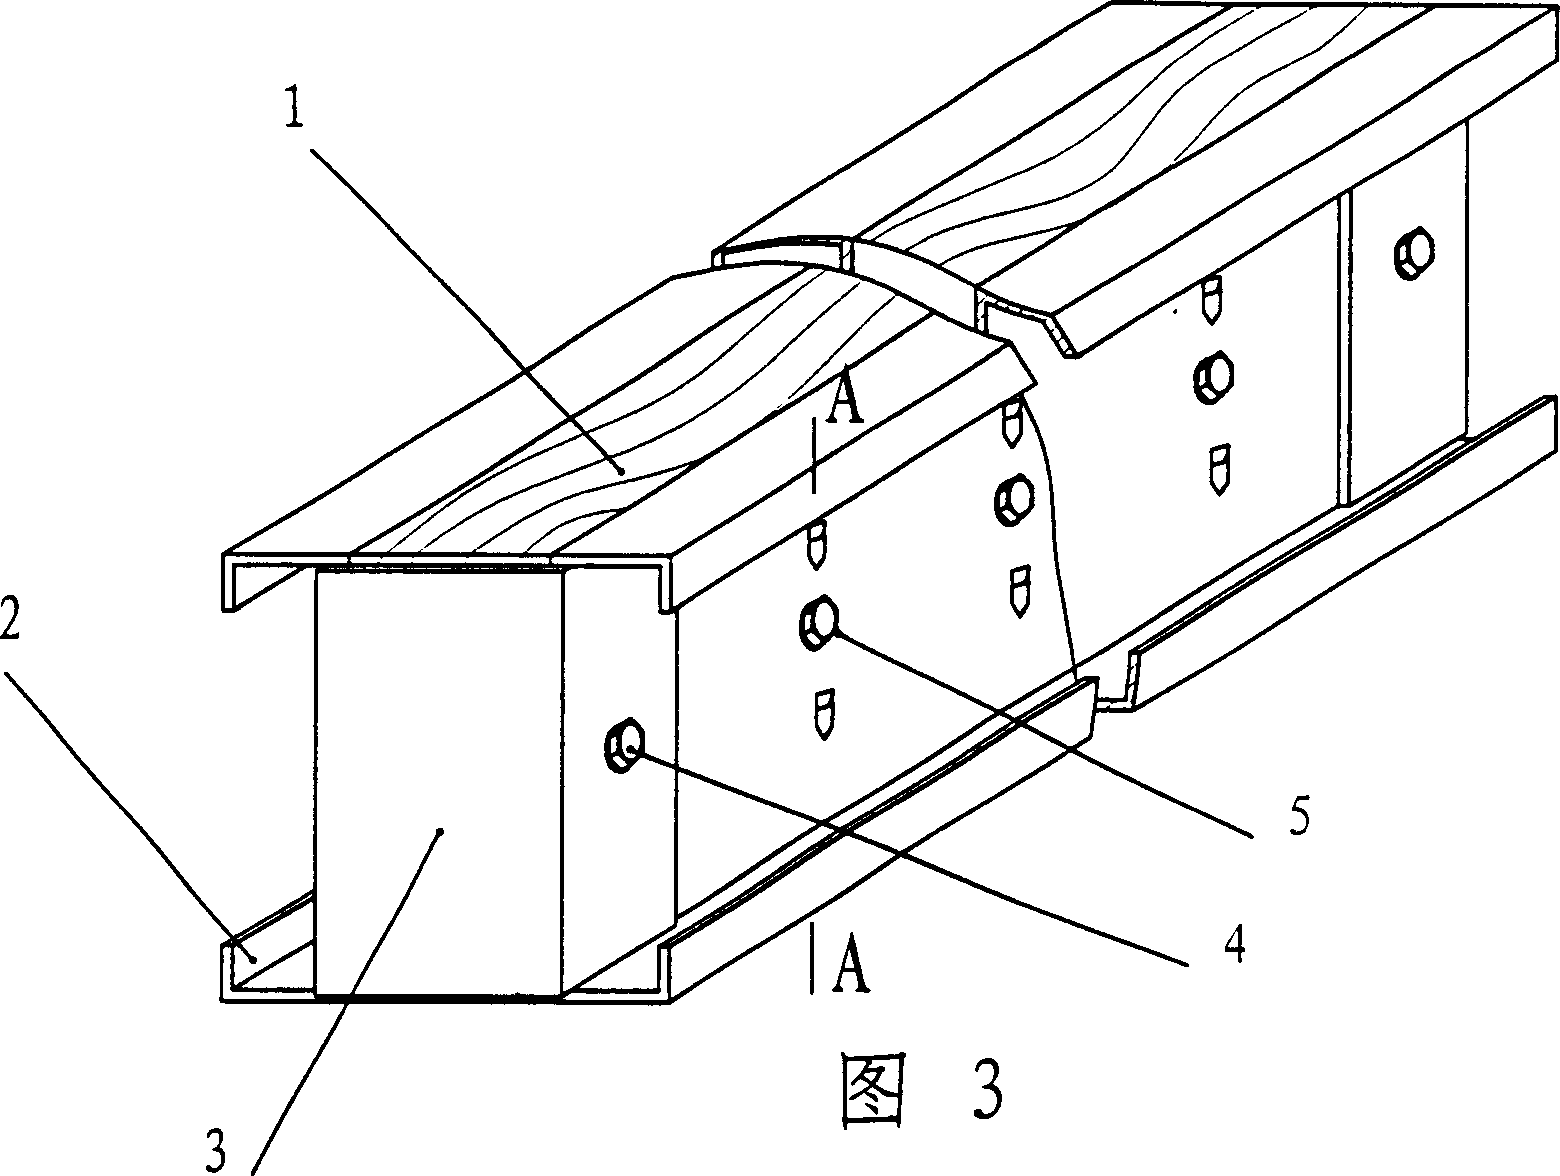 Steel and wood integrated I-shaped beam